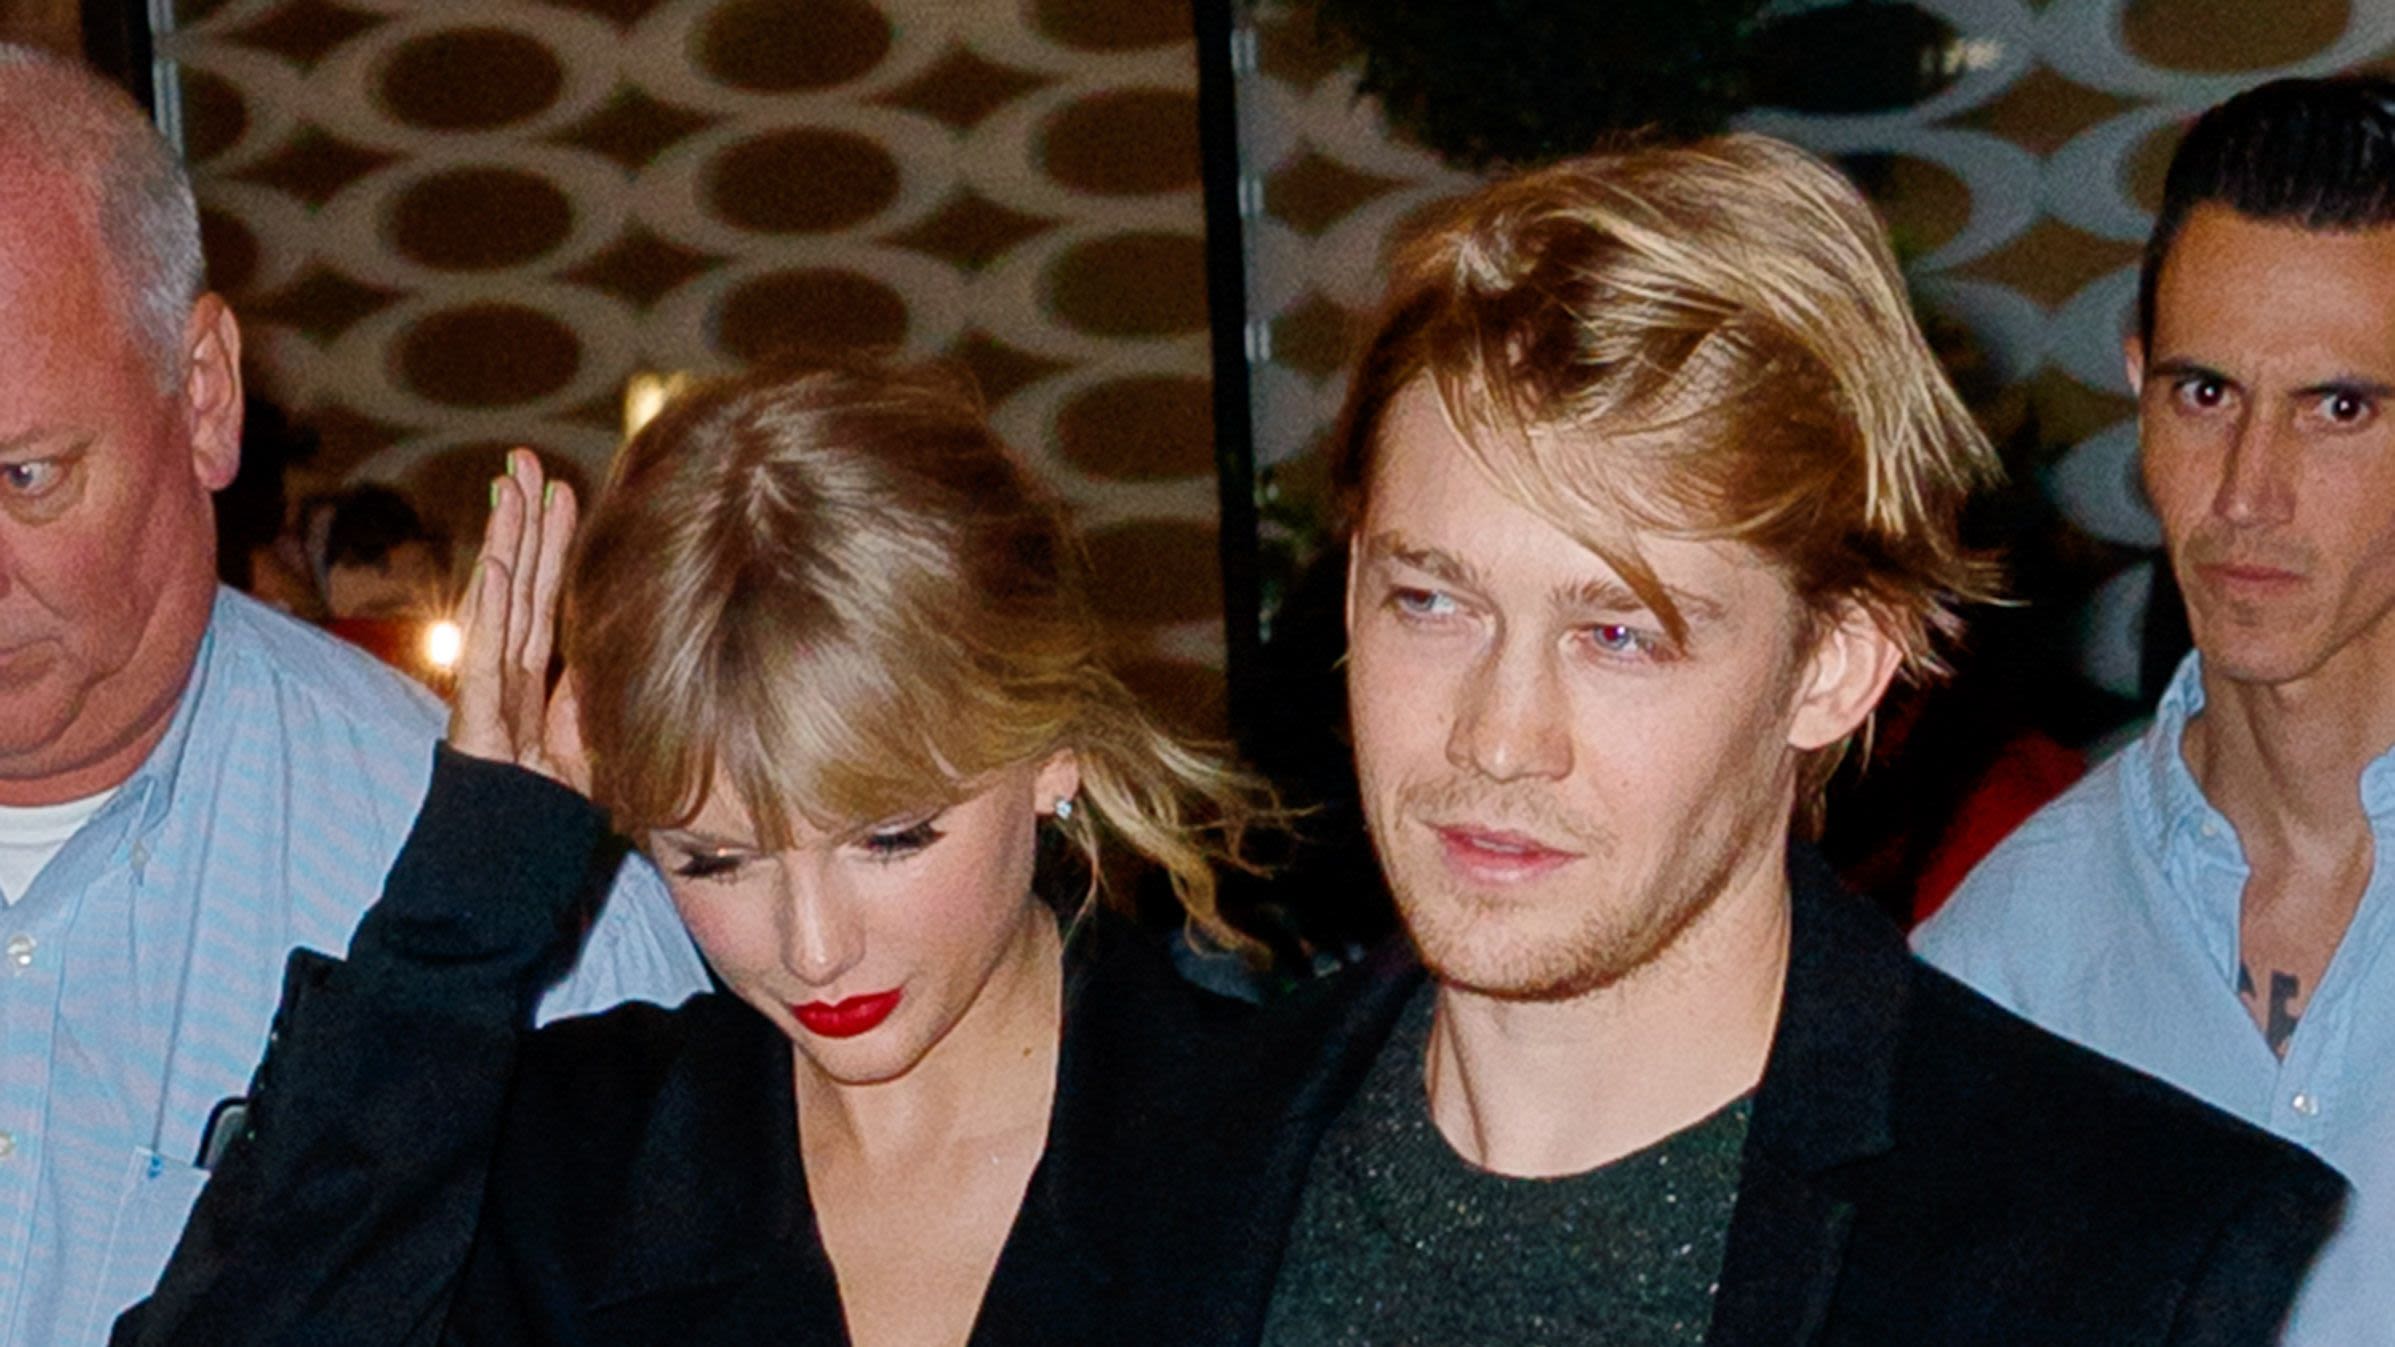 Wondering Whether Joe Alwyn Reached Out to Taylor Swift About 'Tortured Poets'? Sources Are Spilling